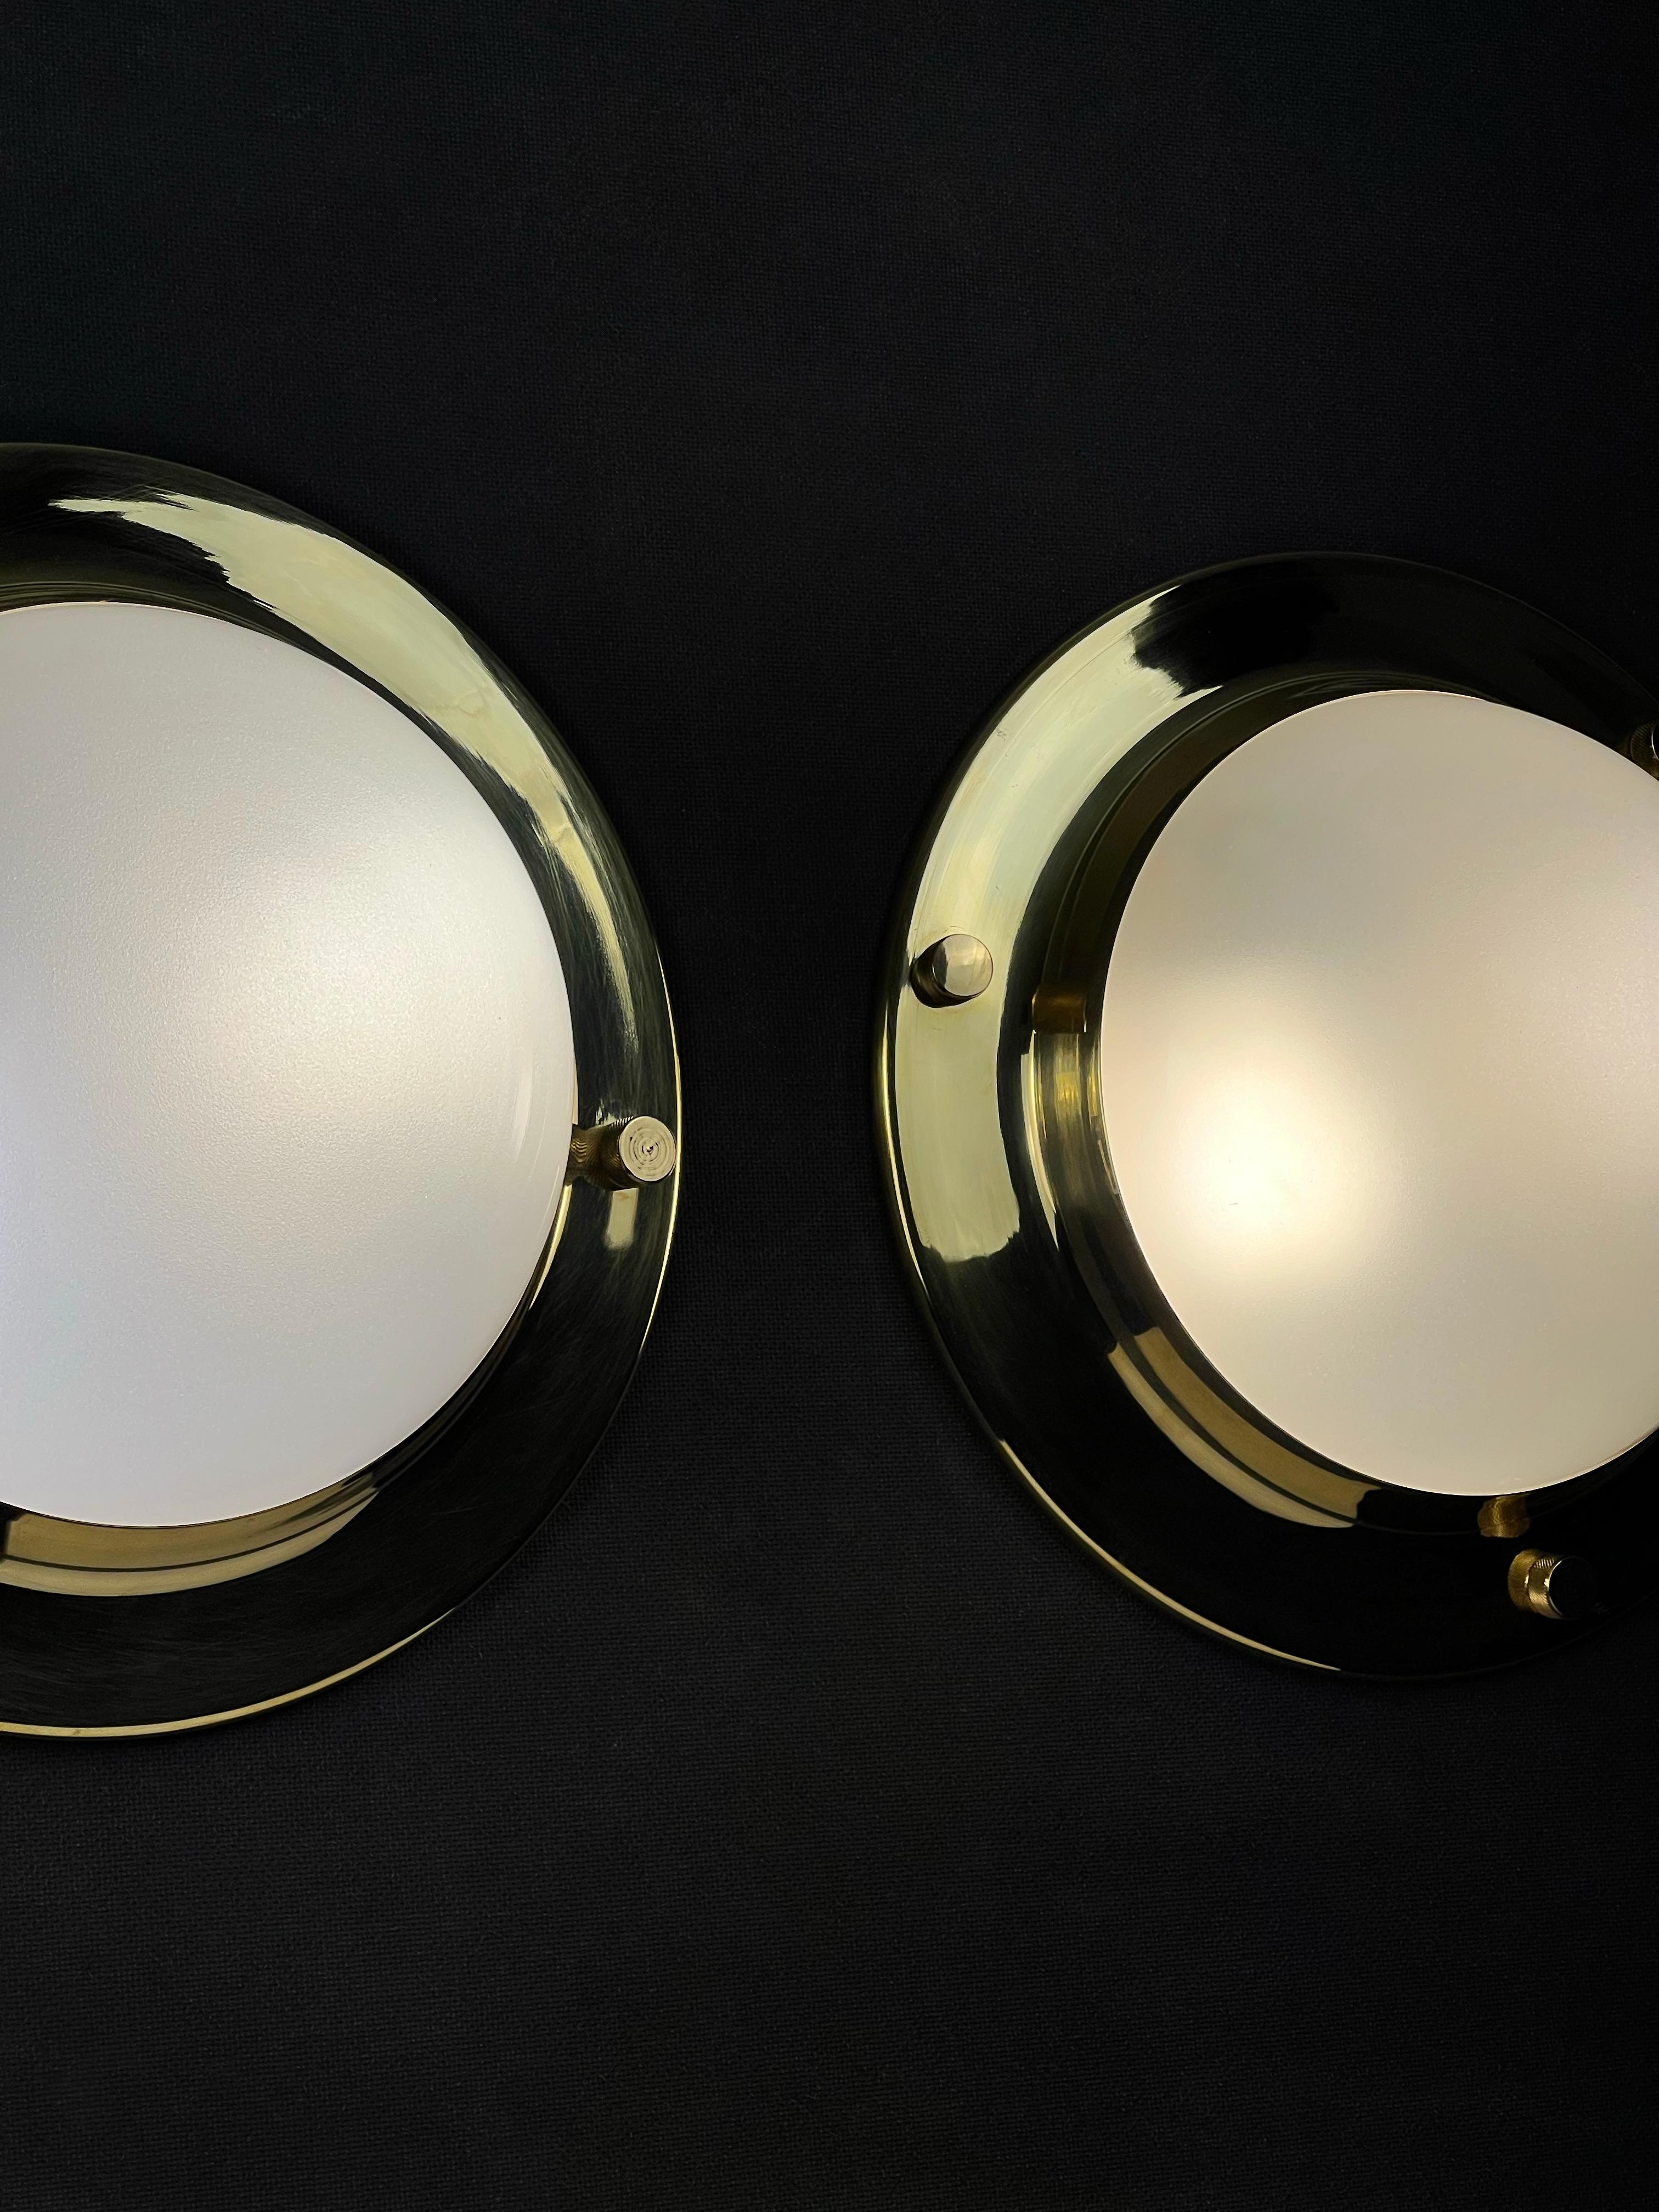 Set of 2 LSp6 Flush Mount / Wall Sconces by Luigi Caccia Dominioni for Azucena For Sale 2